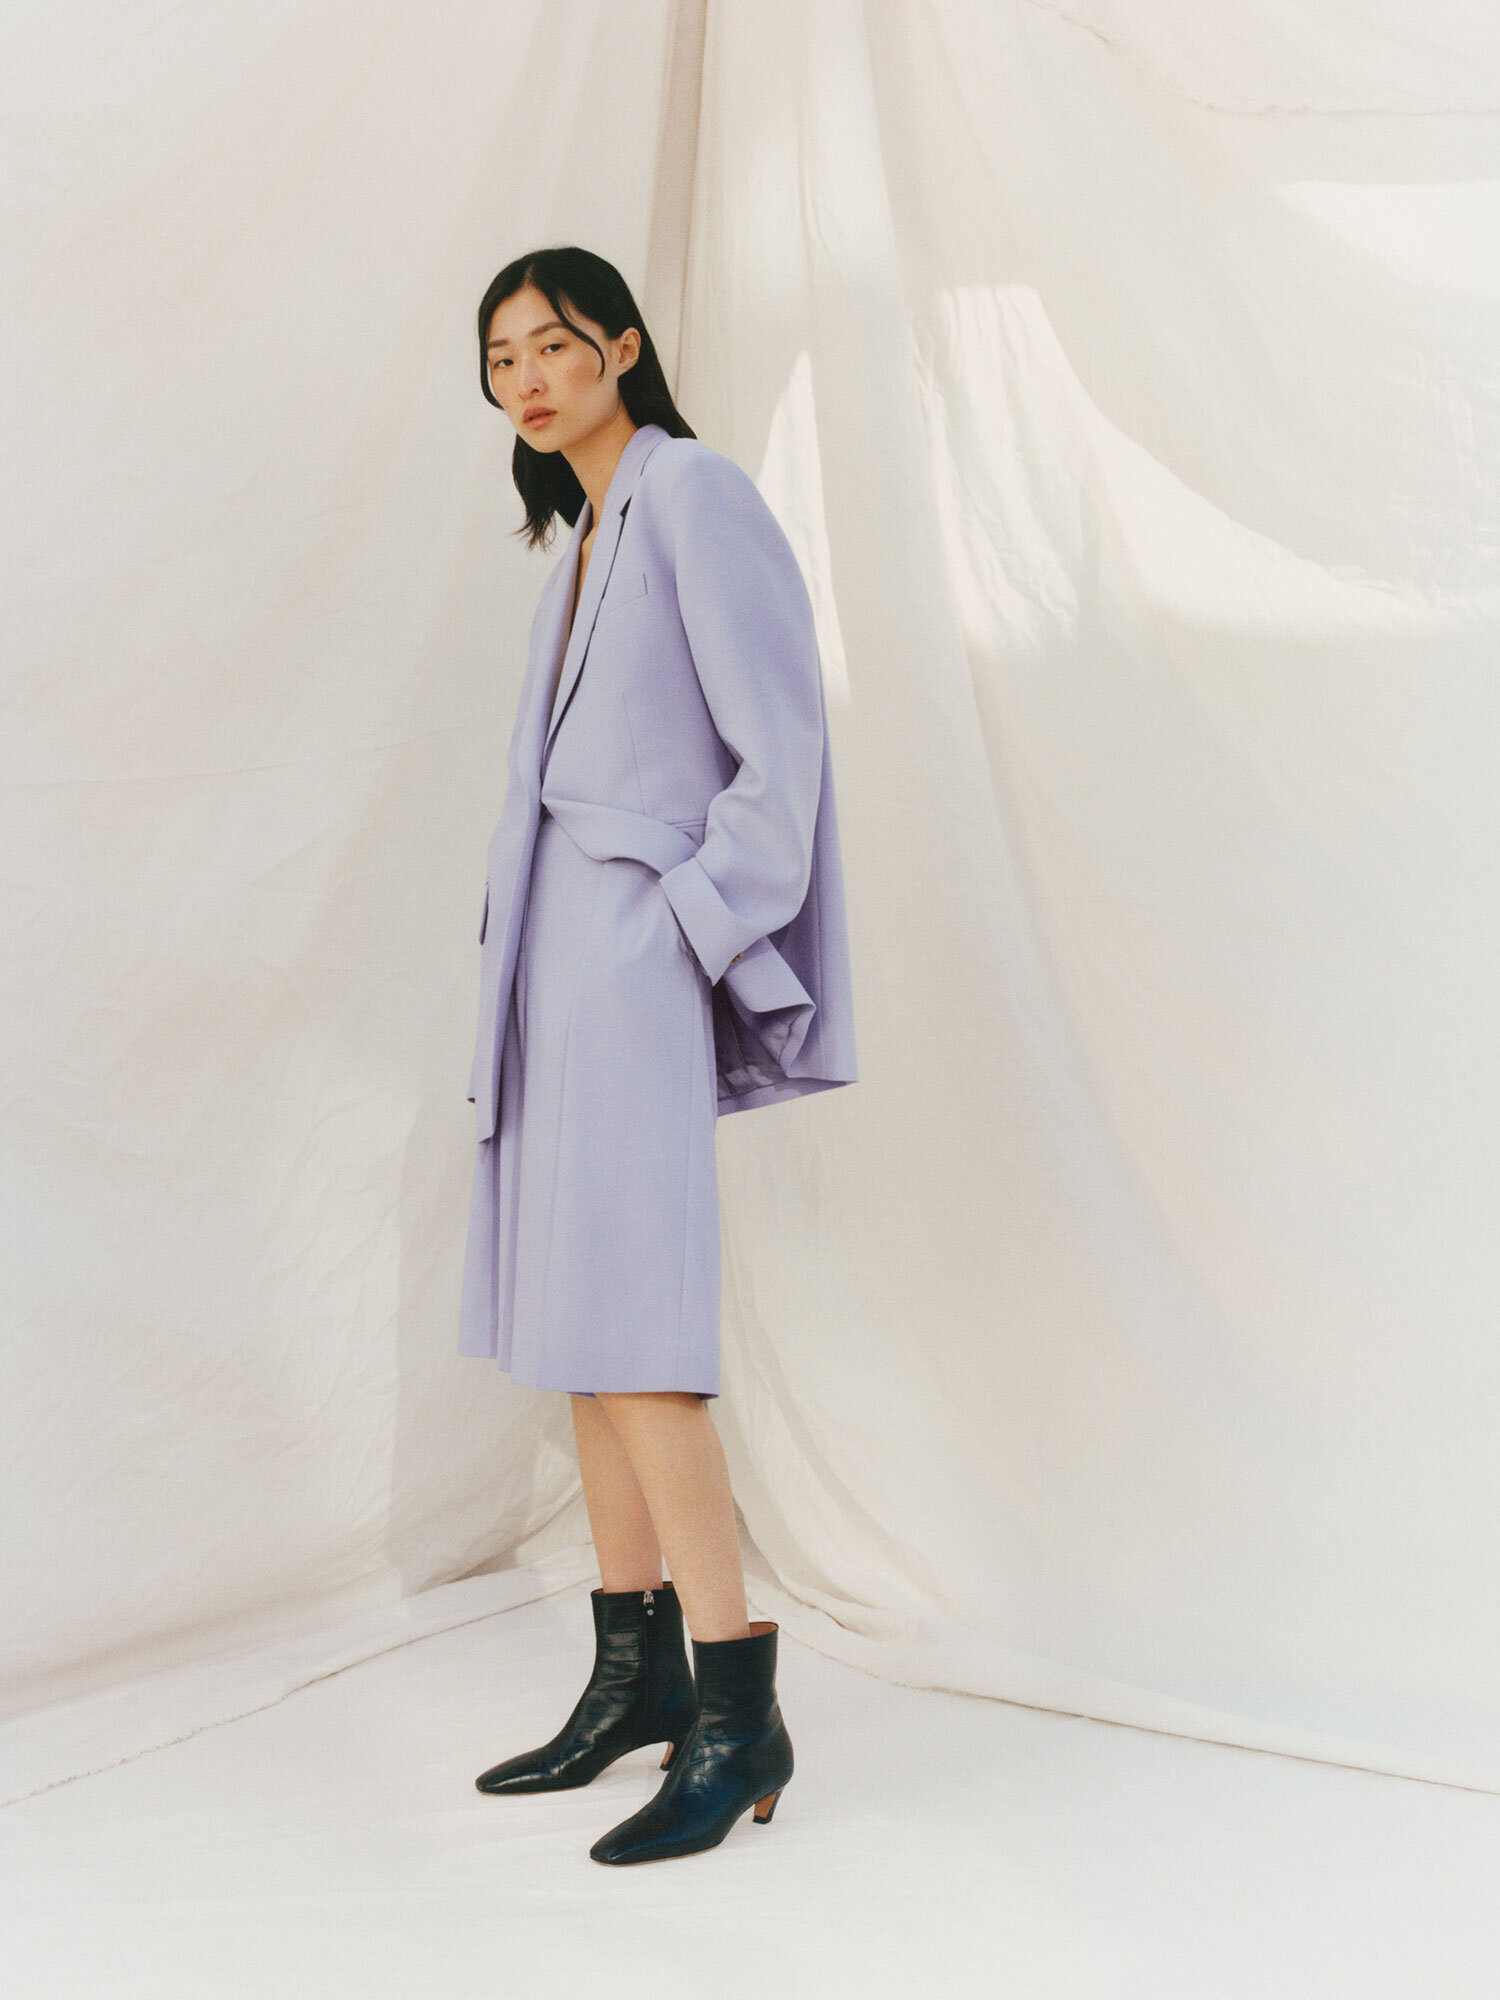 ARKET relaxed tailoring — Lucia Garcia Rey